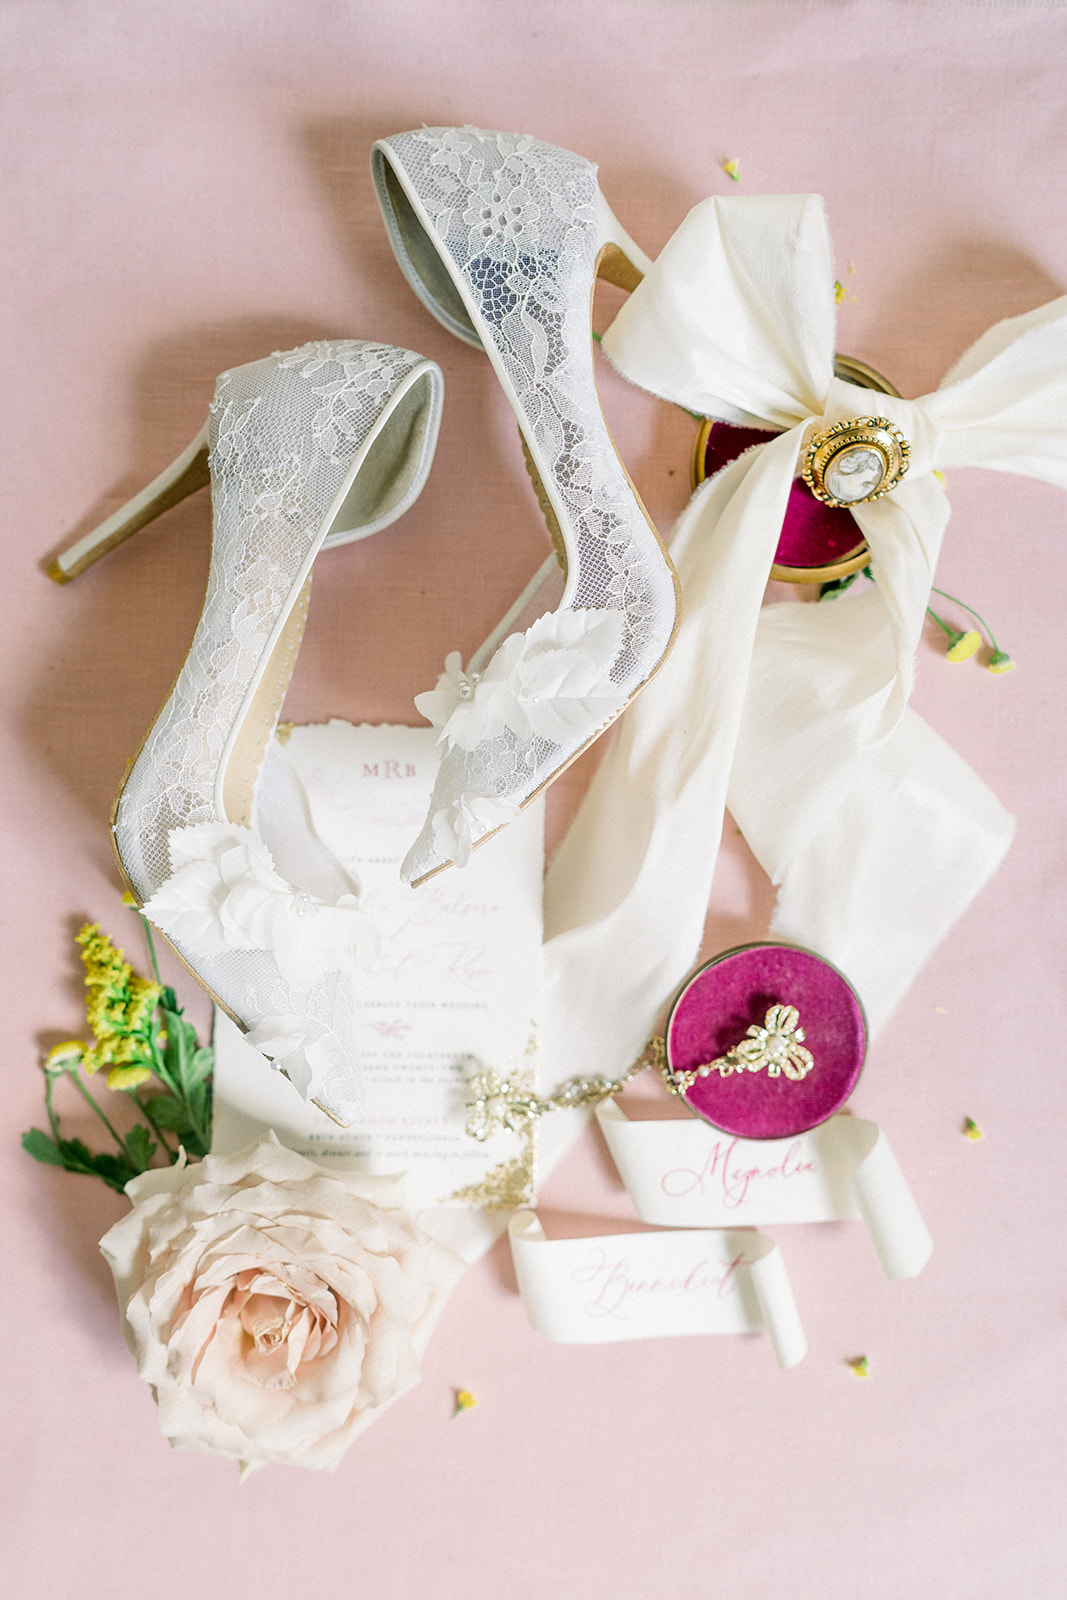 Intricate lace details on bridal shoes by Sachlirene, perfect for a luxury destination wedding.